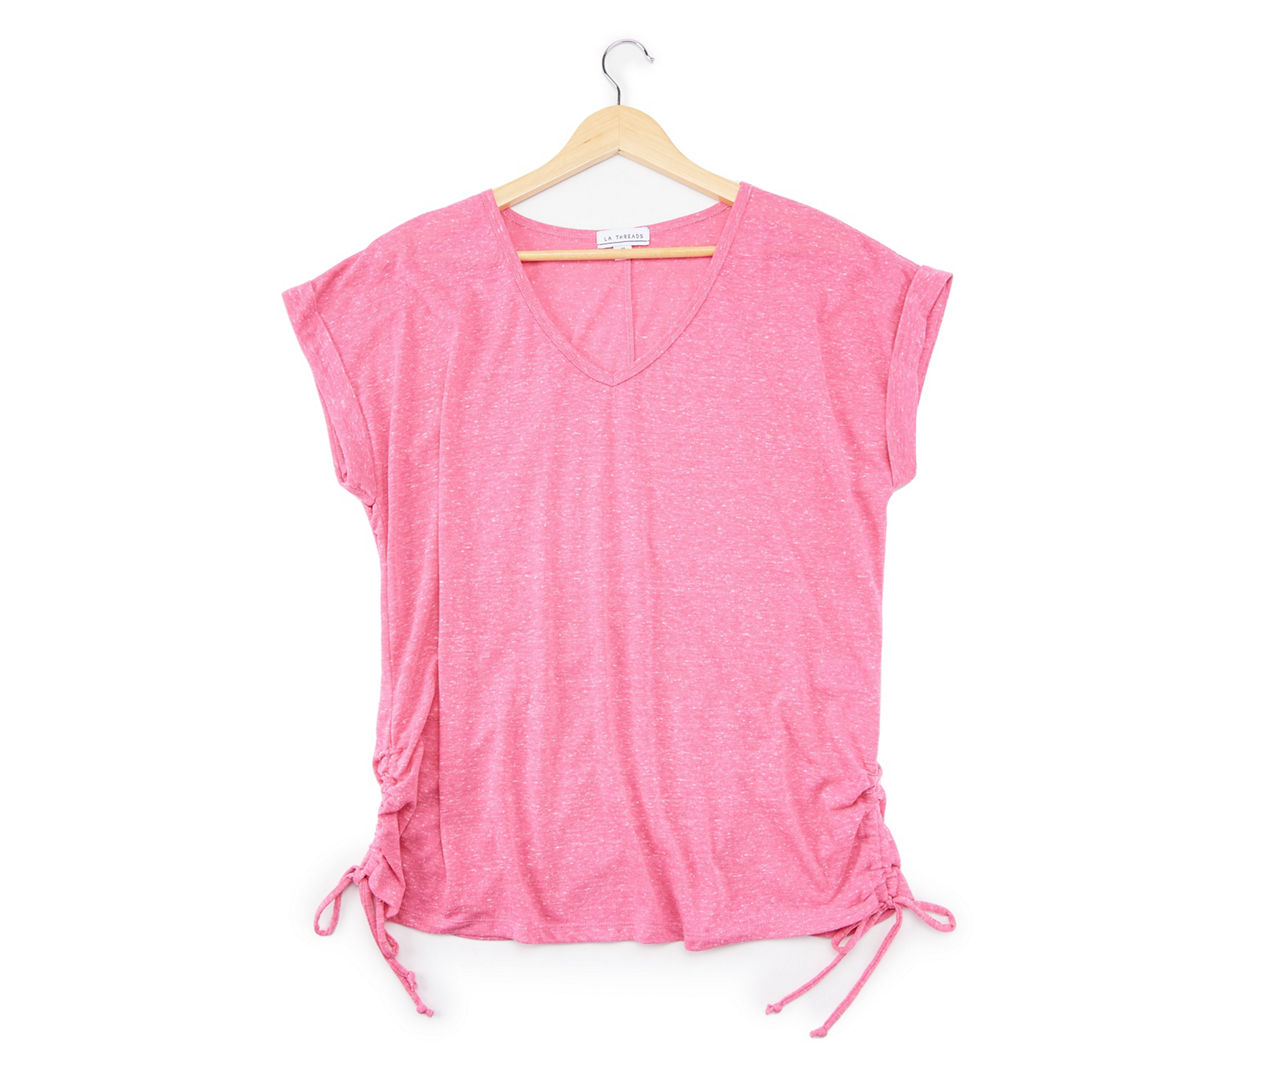 Women's Size M Bright Berry Pink Cap-Sleeve V-Neck Tee